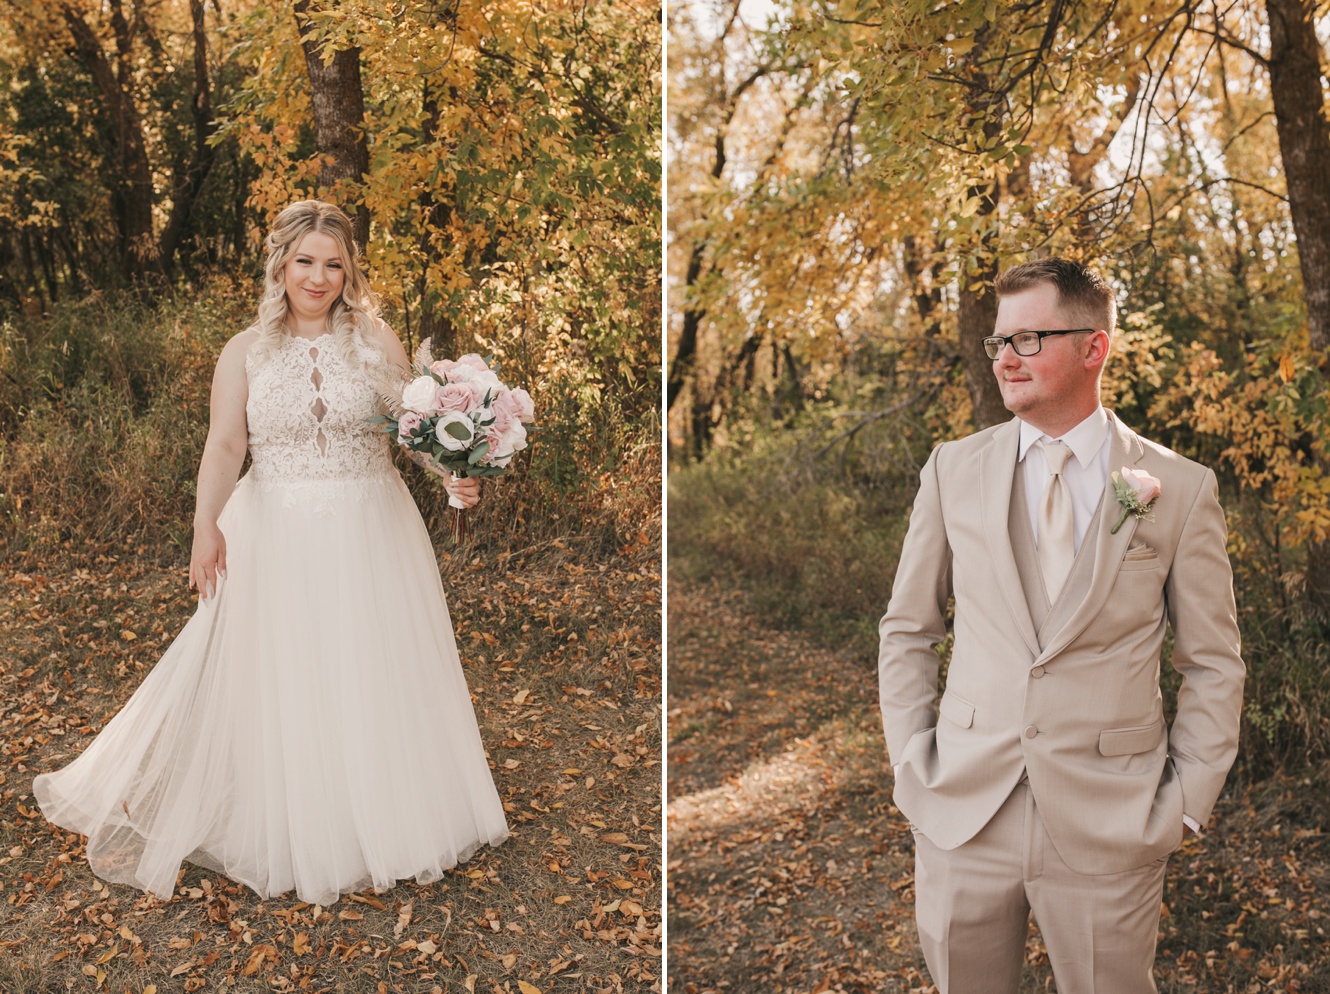 Lovely Fall Wedding at Rotary Park in Estevan Complete with First Look